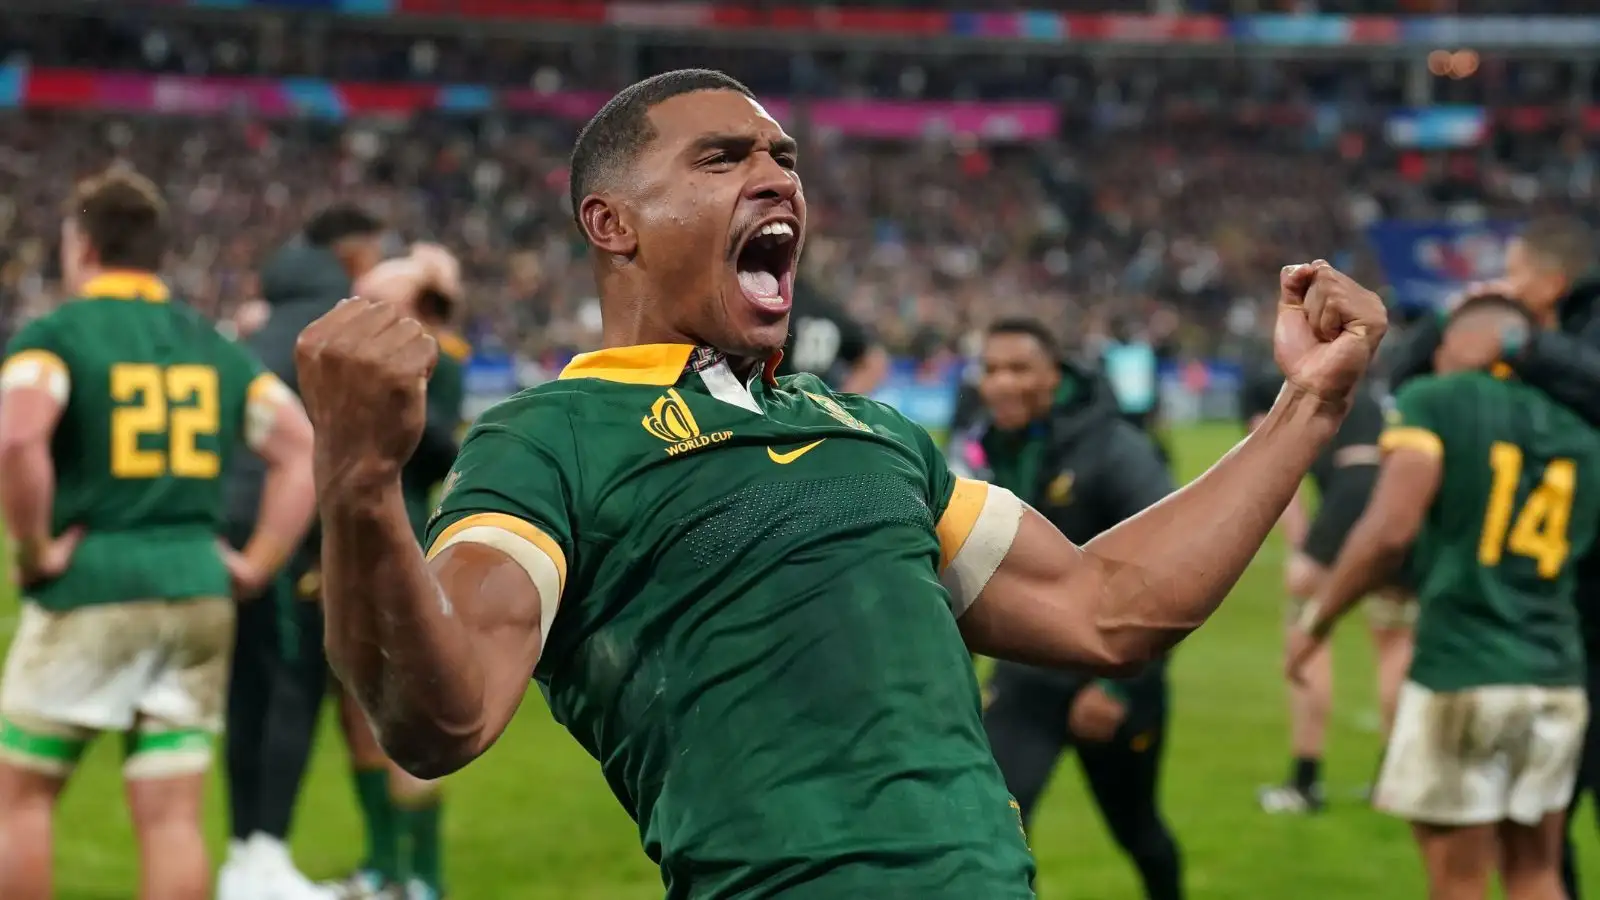 South Africa's Damian Willemse celebrates victory after the final whistle following the Rugby World Cup 2023 final match at the Stade de France in Paris.